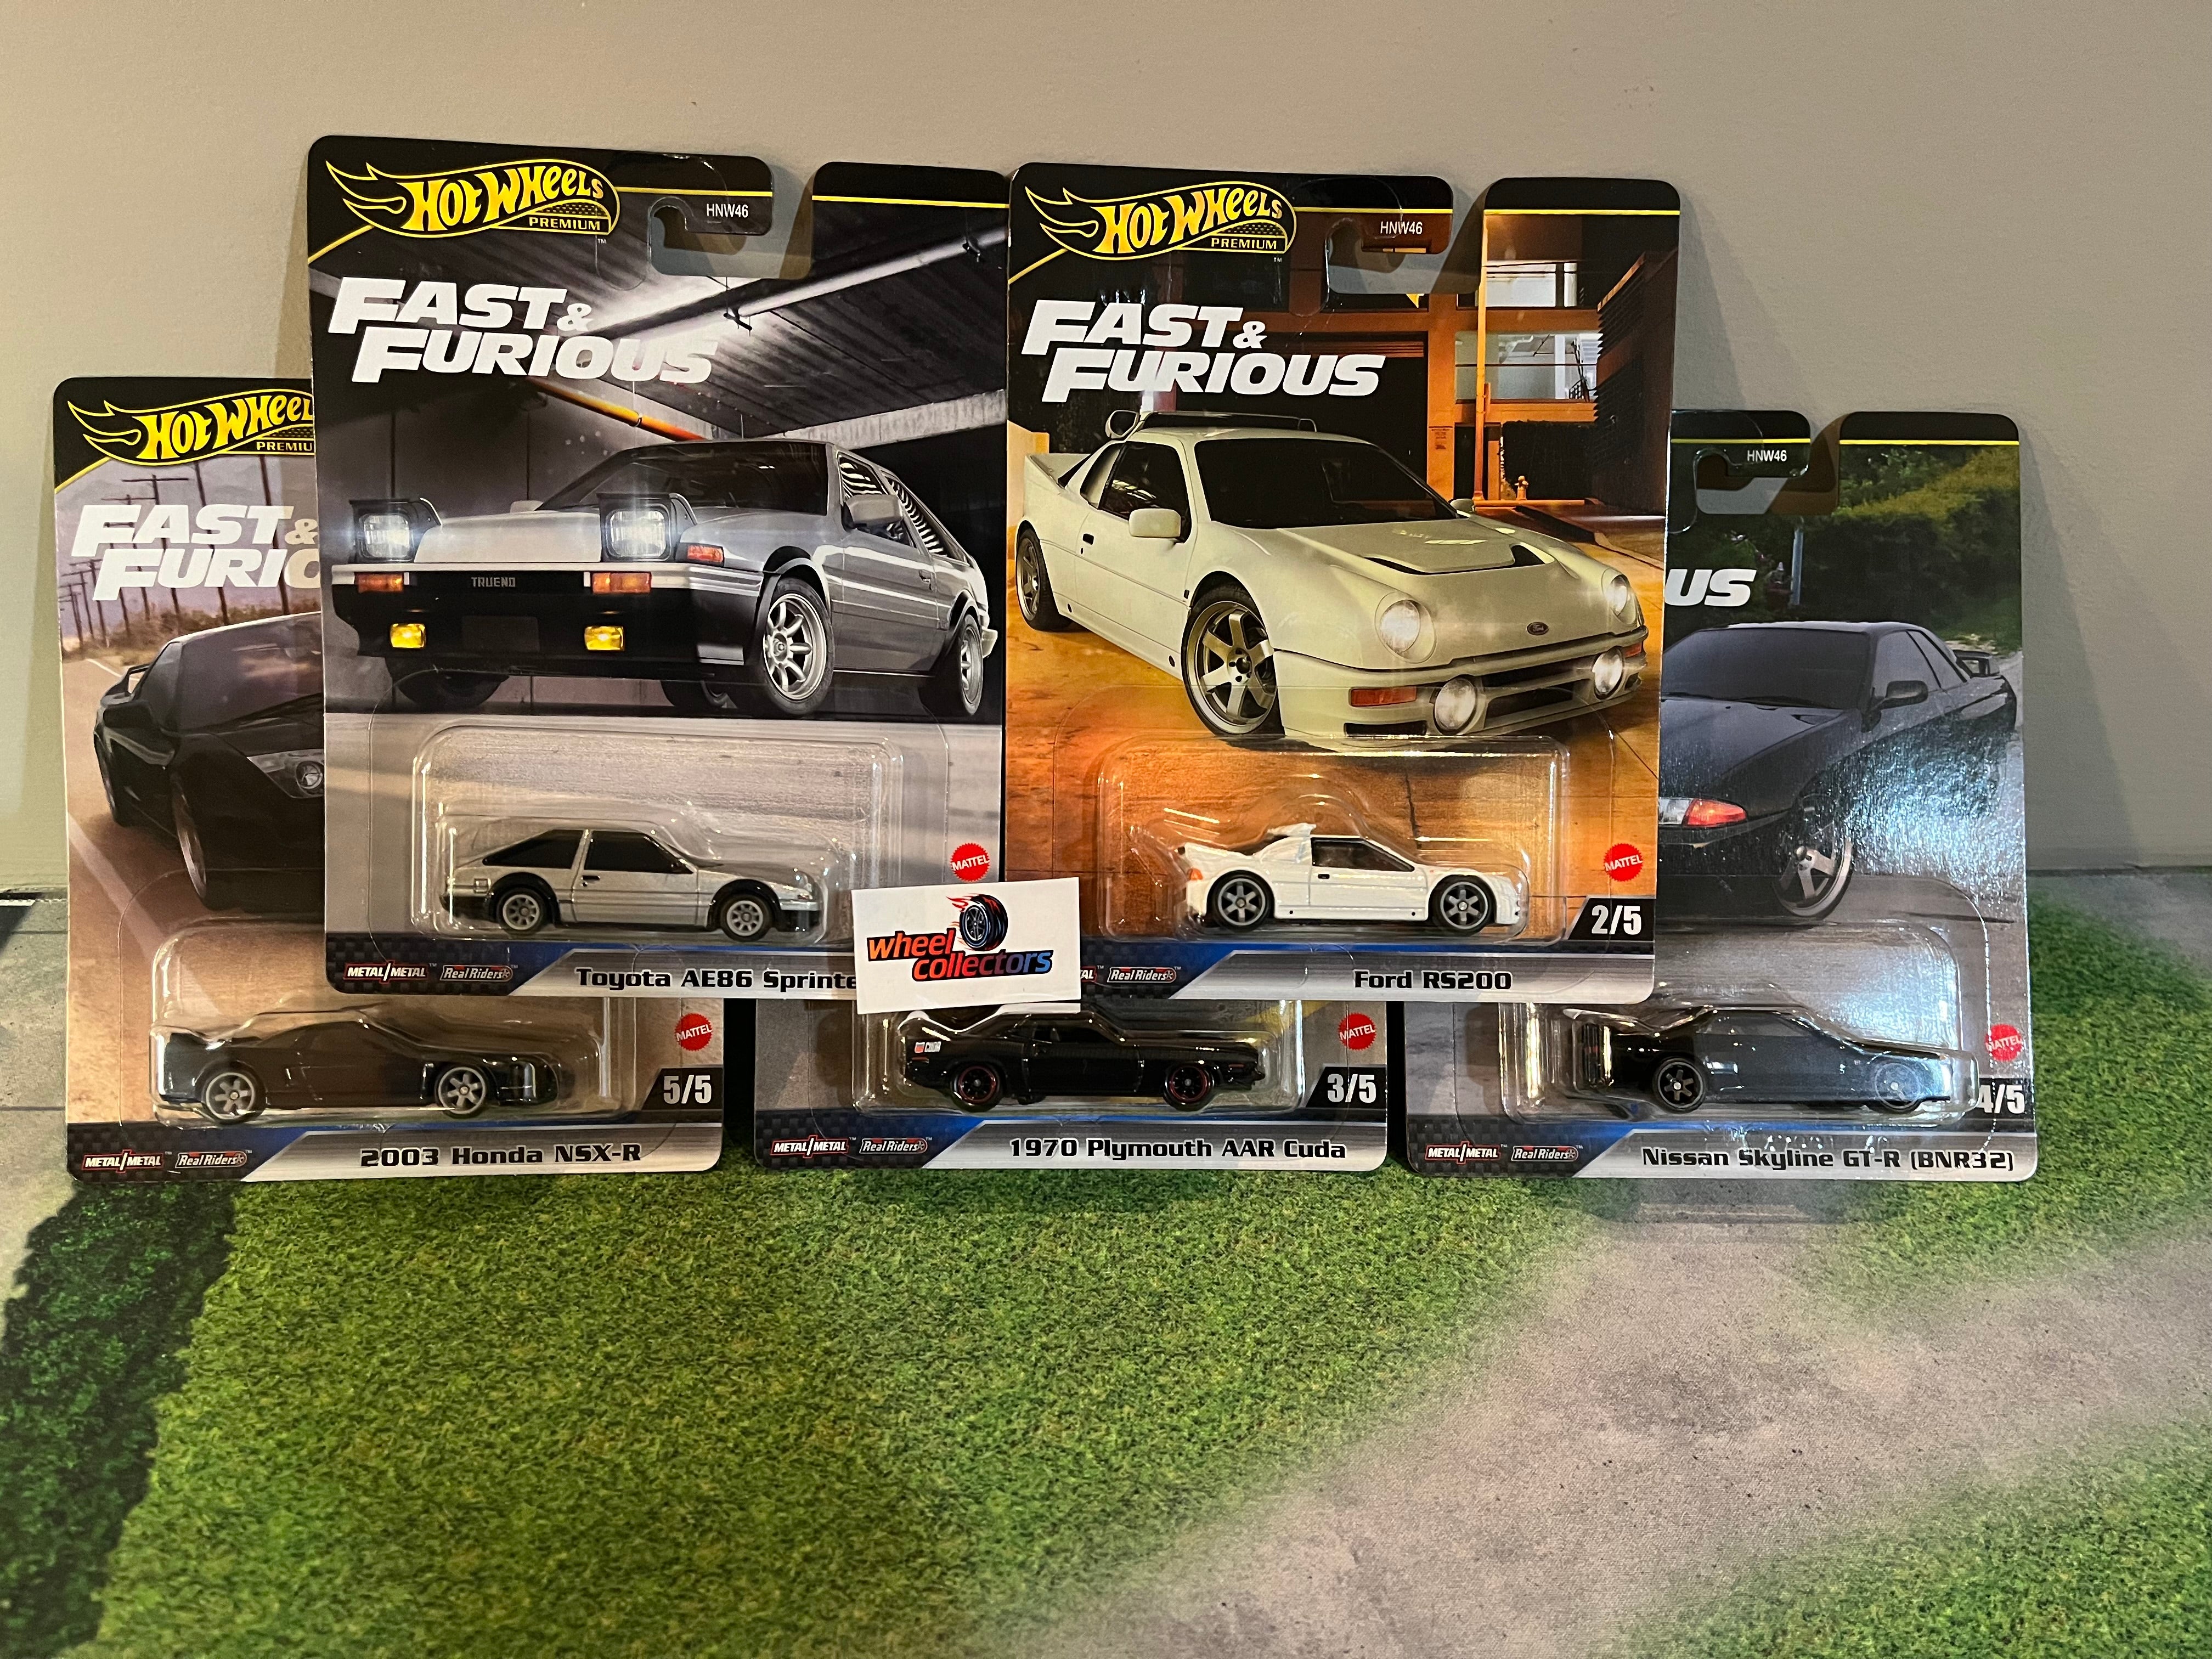 NEW HOT WHEELS FAST & FURIOUS FULL FORCE SET 5 ALL METAL VEHICLES UNOPENED  RARE